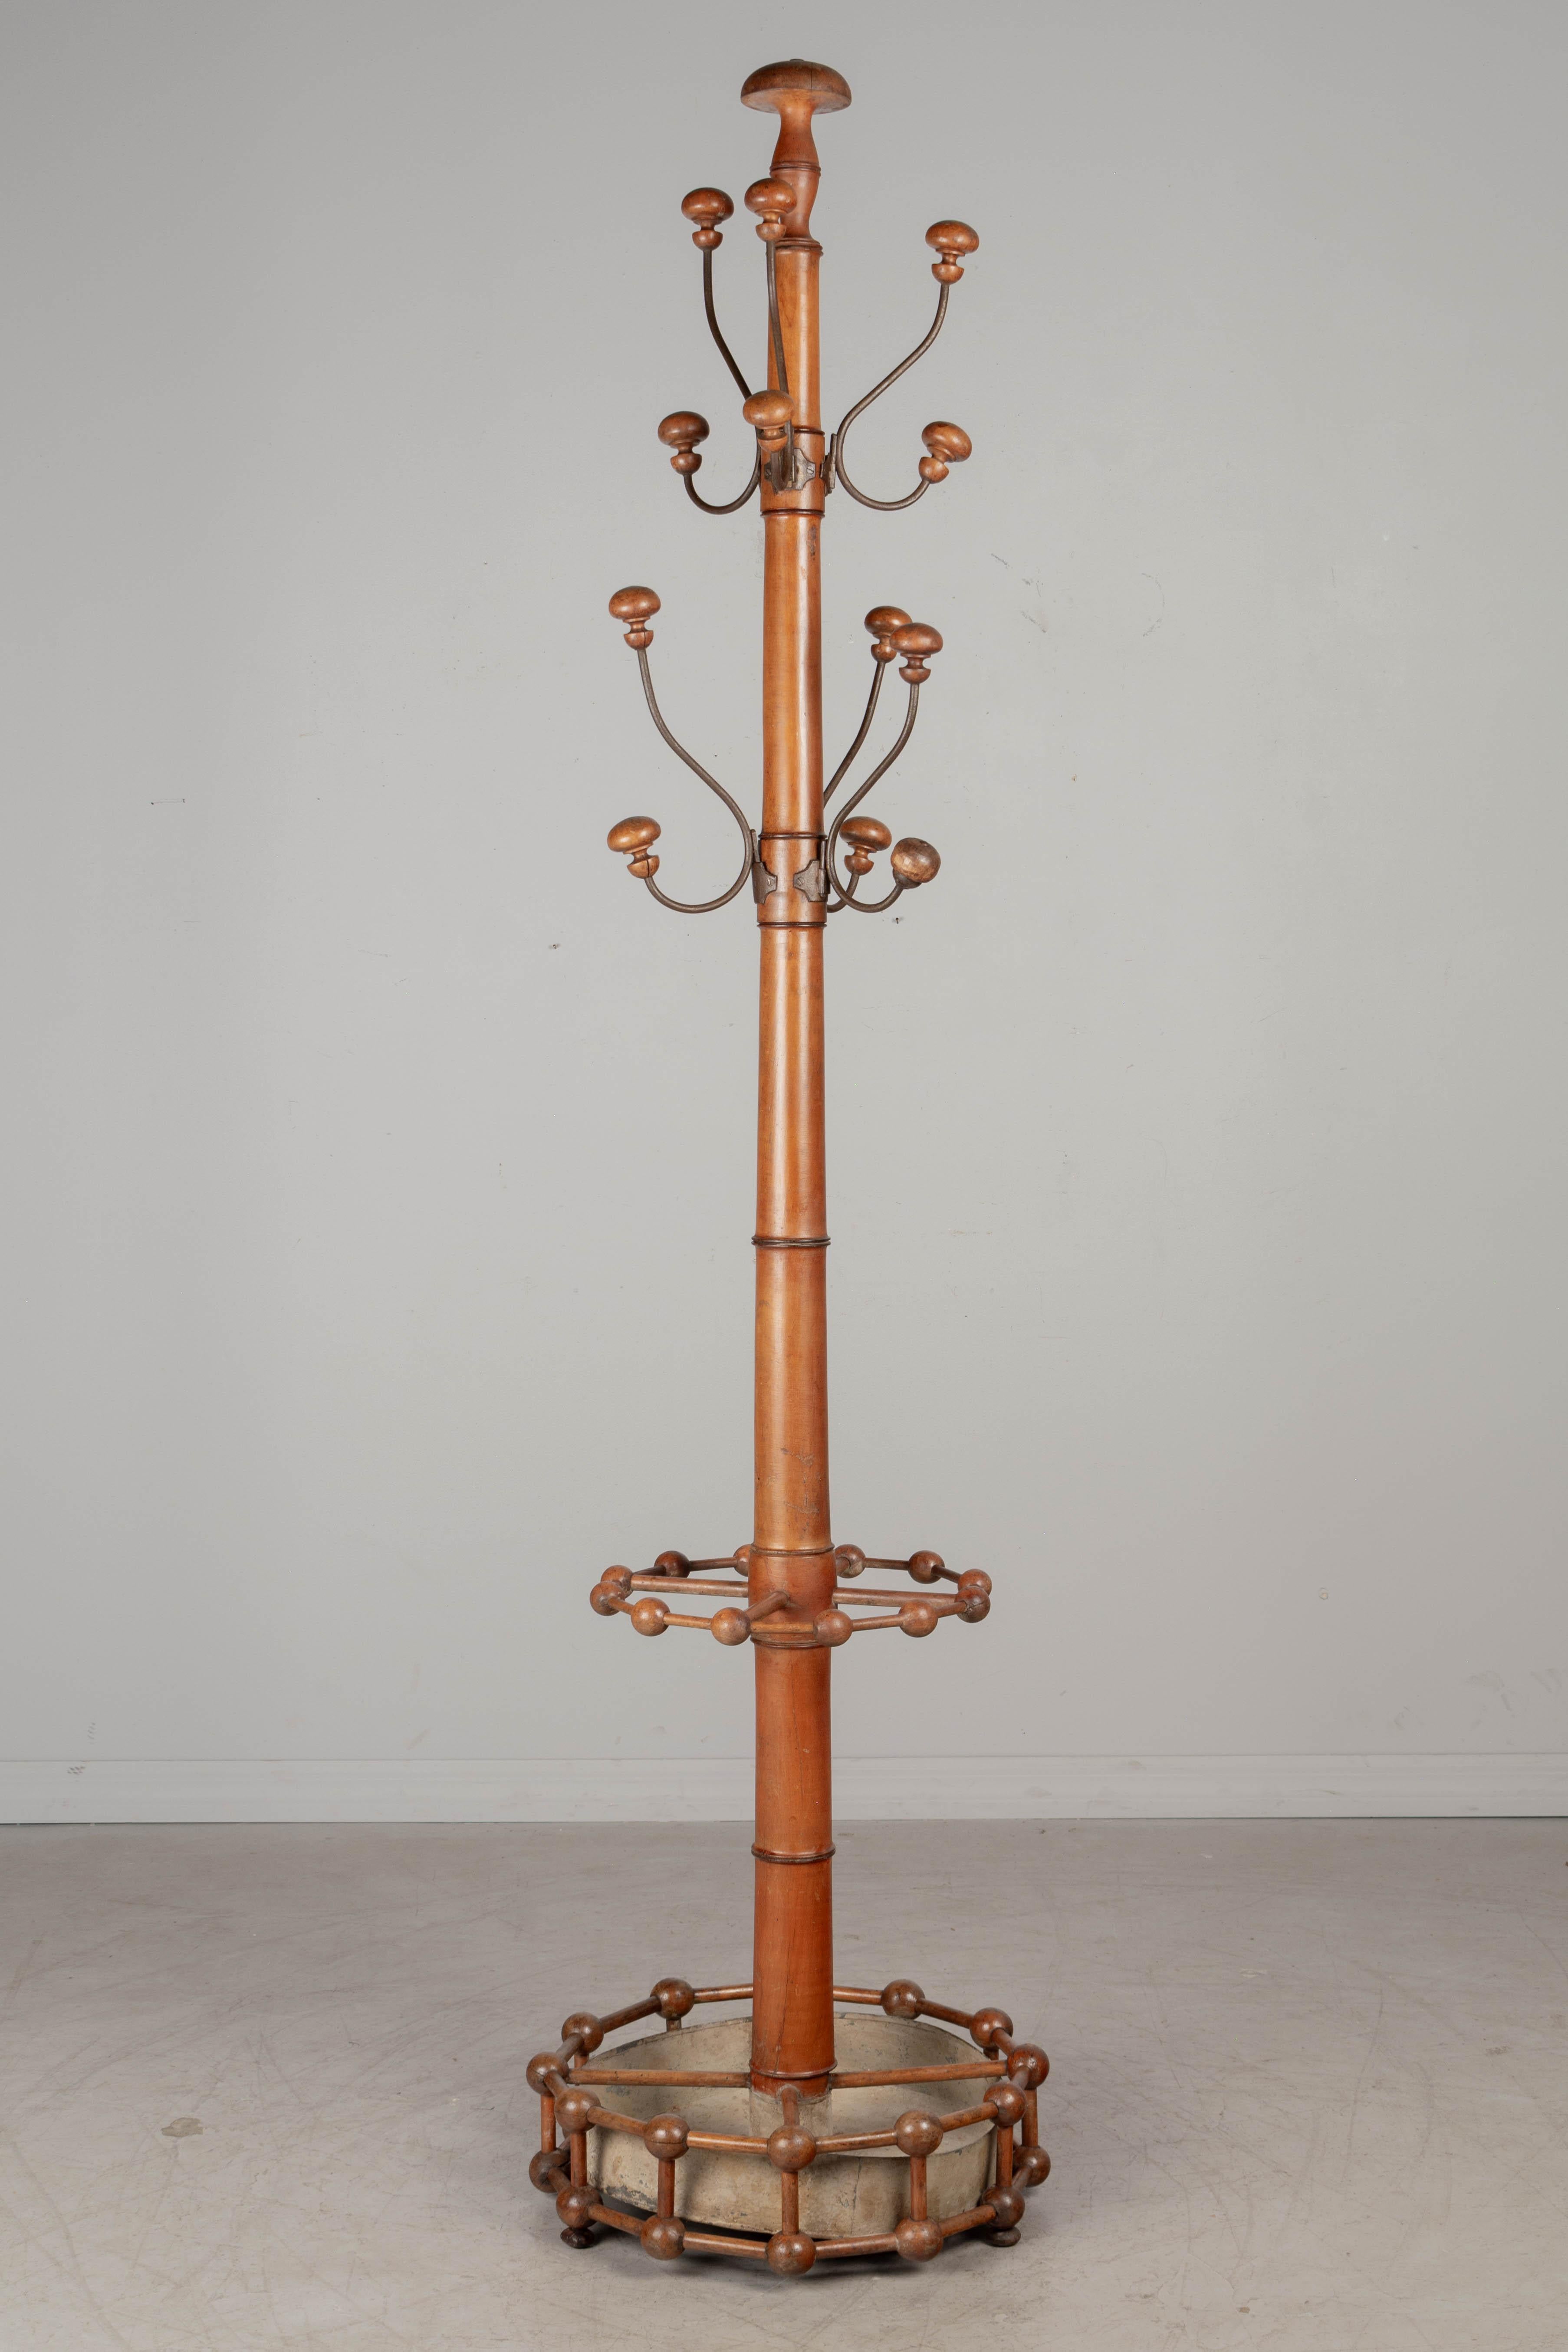 A 19th century French faux bamboo hall tree, or coat rack, made of beech wood. Large, sturdy tapered turned center pole with six metal hooks, each with two large turned pegs for hanging hats and coats. One hook repaired. Circular base with ball and